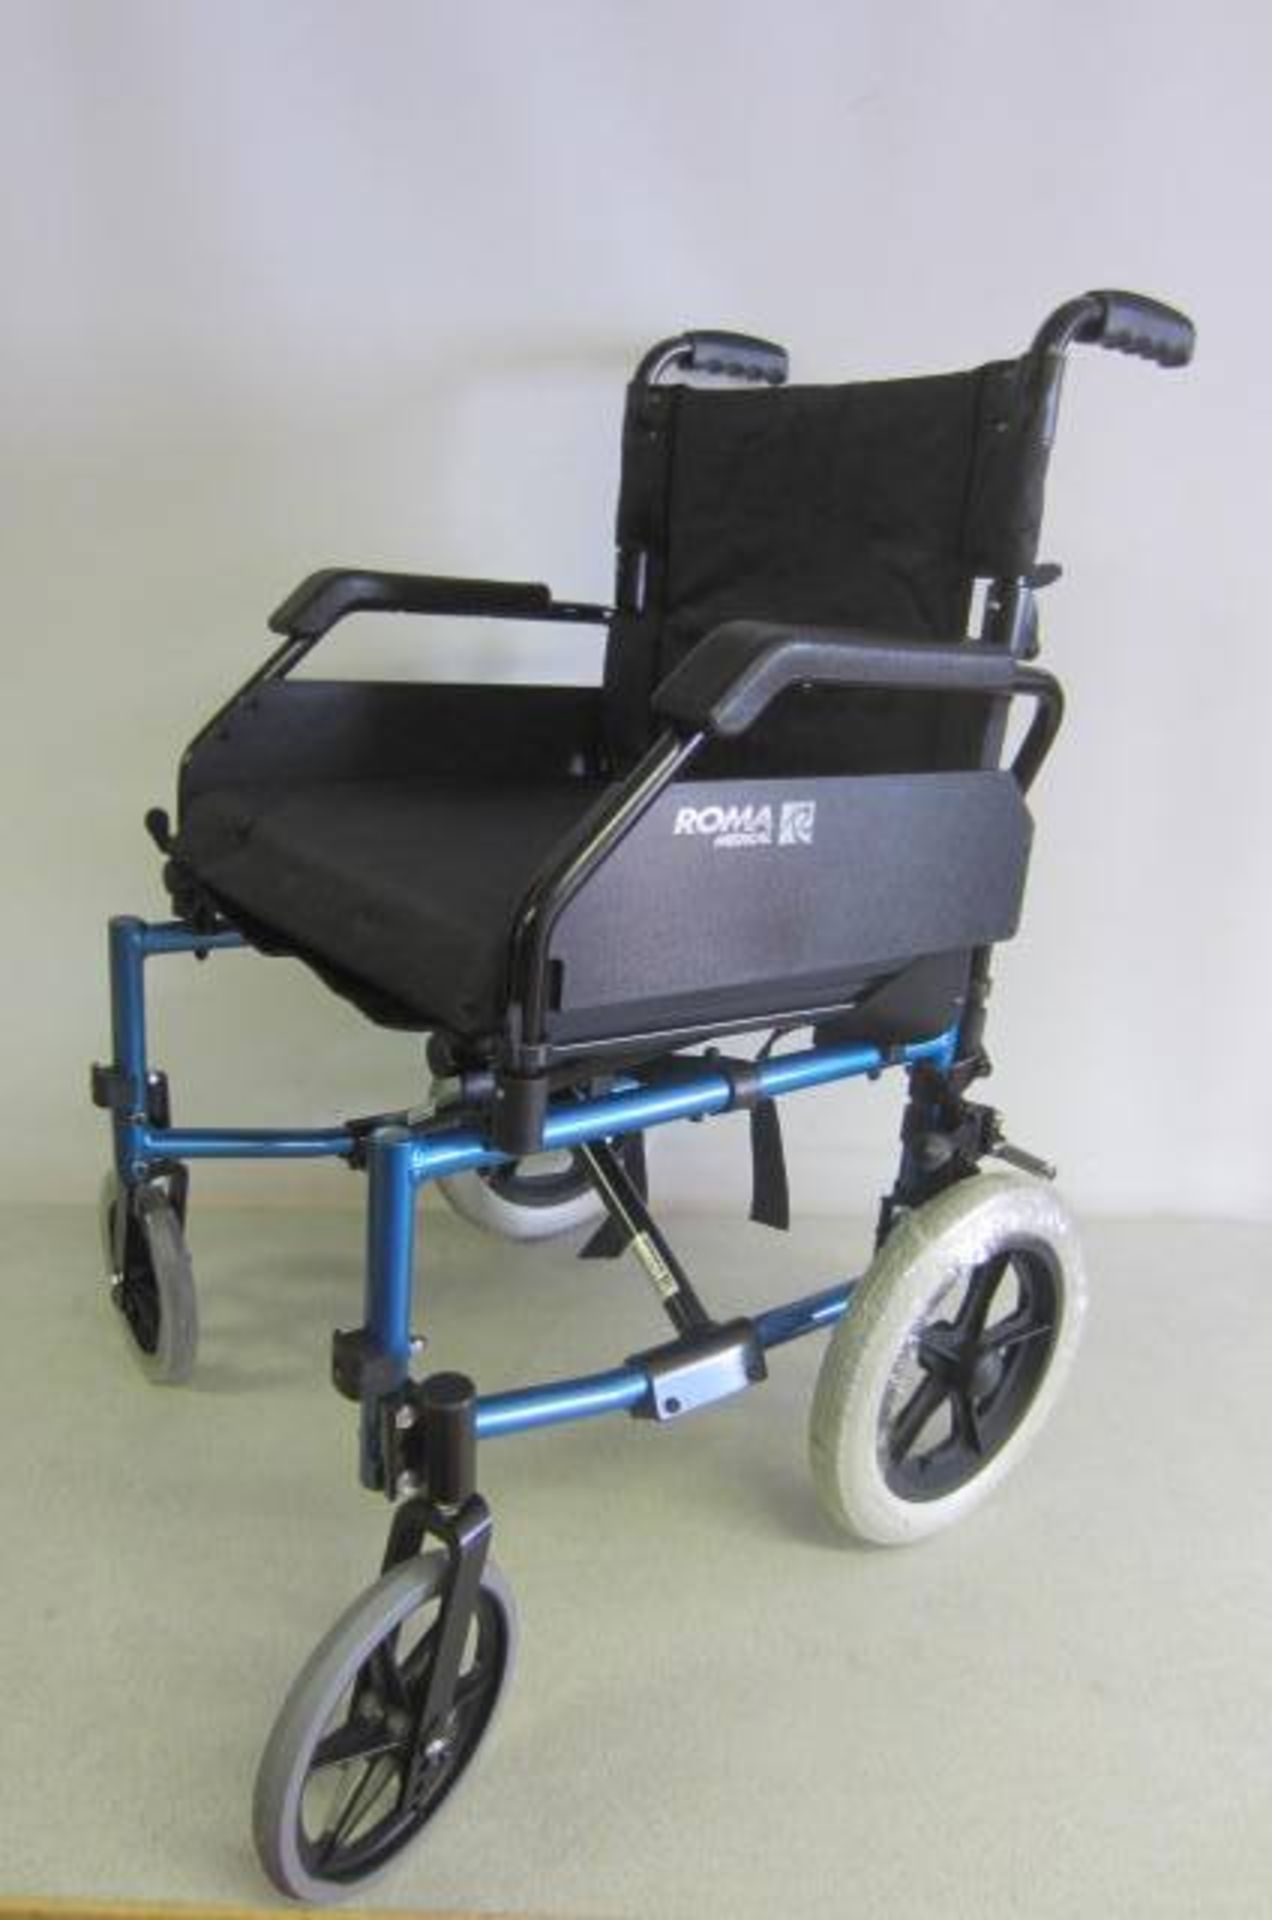 Roma Medical Lightweight Car Transit Wheel Chair, Model 1530BL. In Box As New. RRP £255.00 - Image 2 of 3